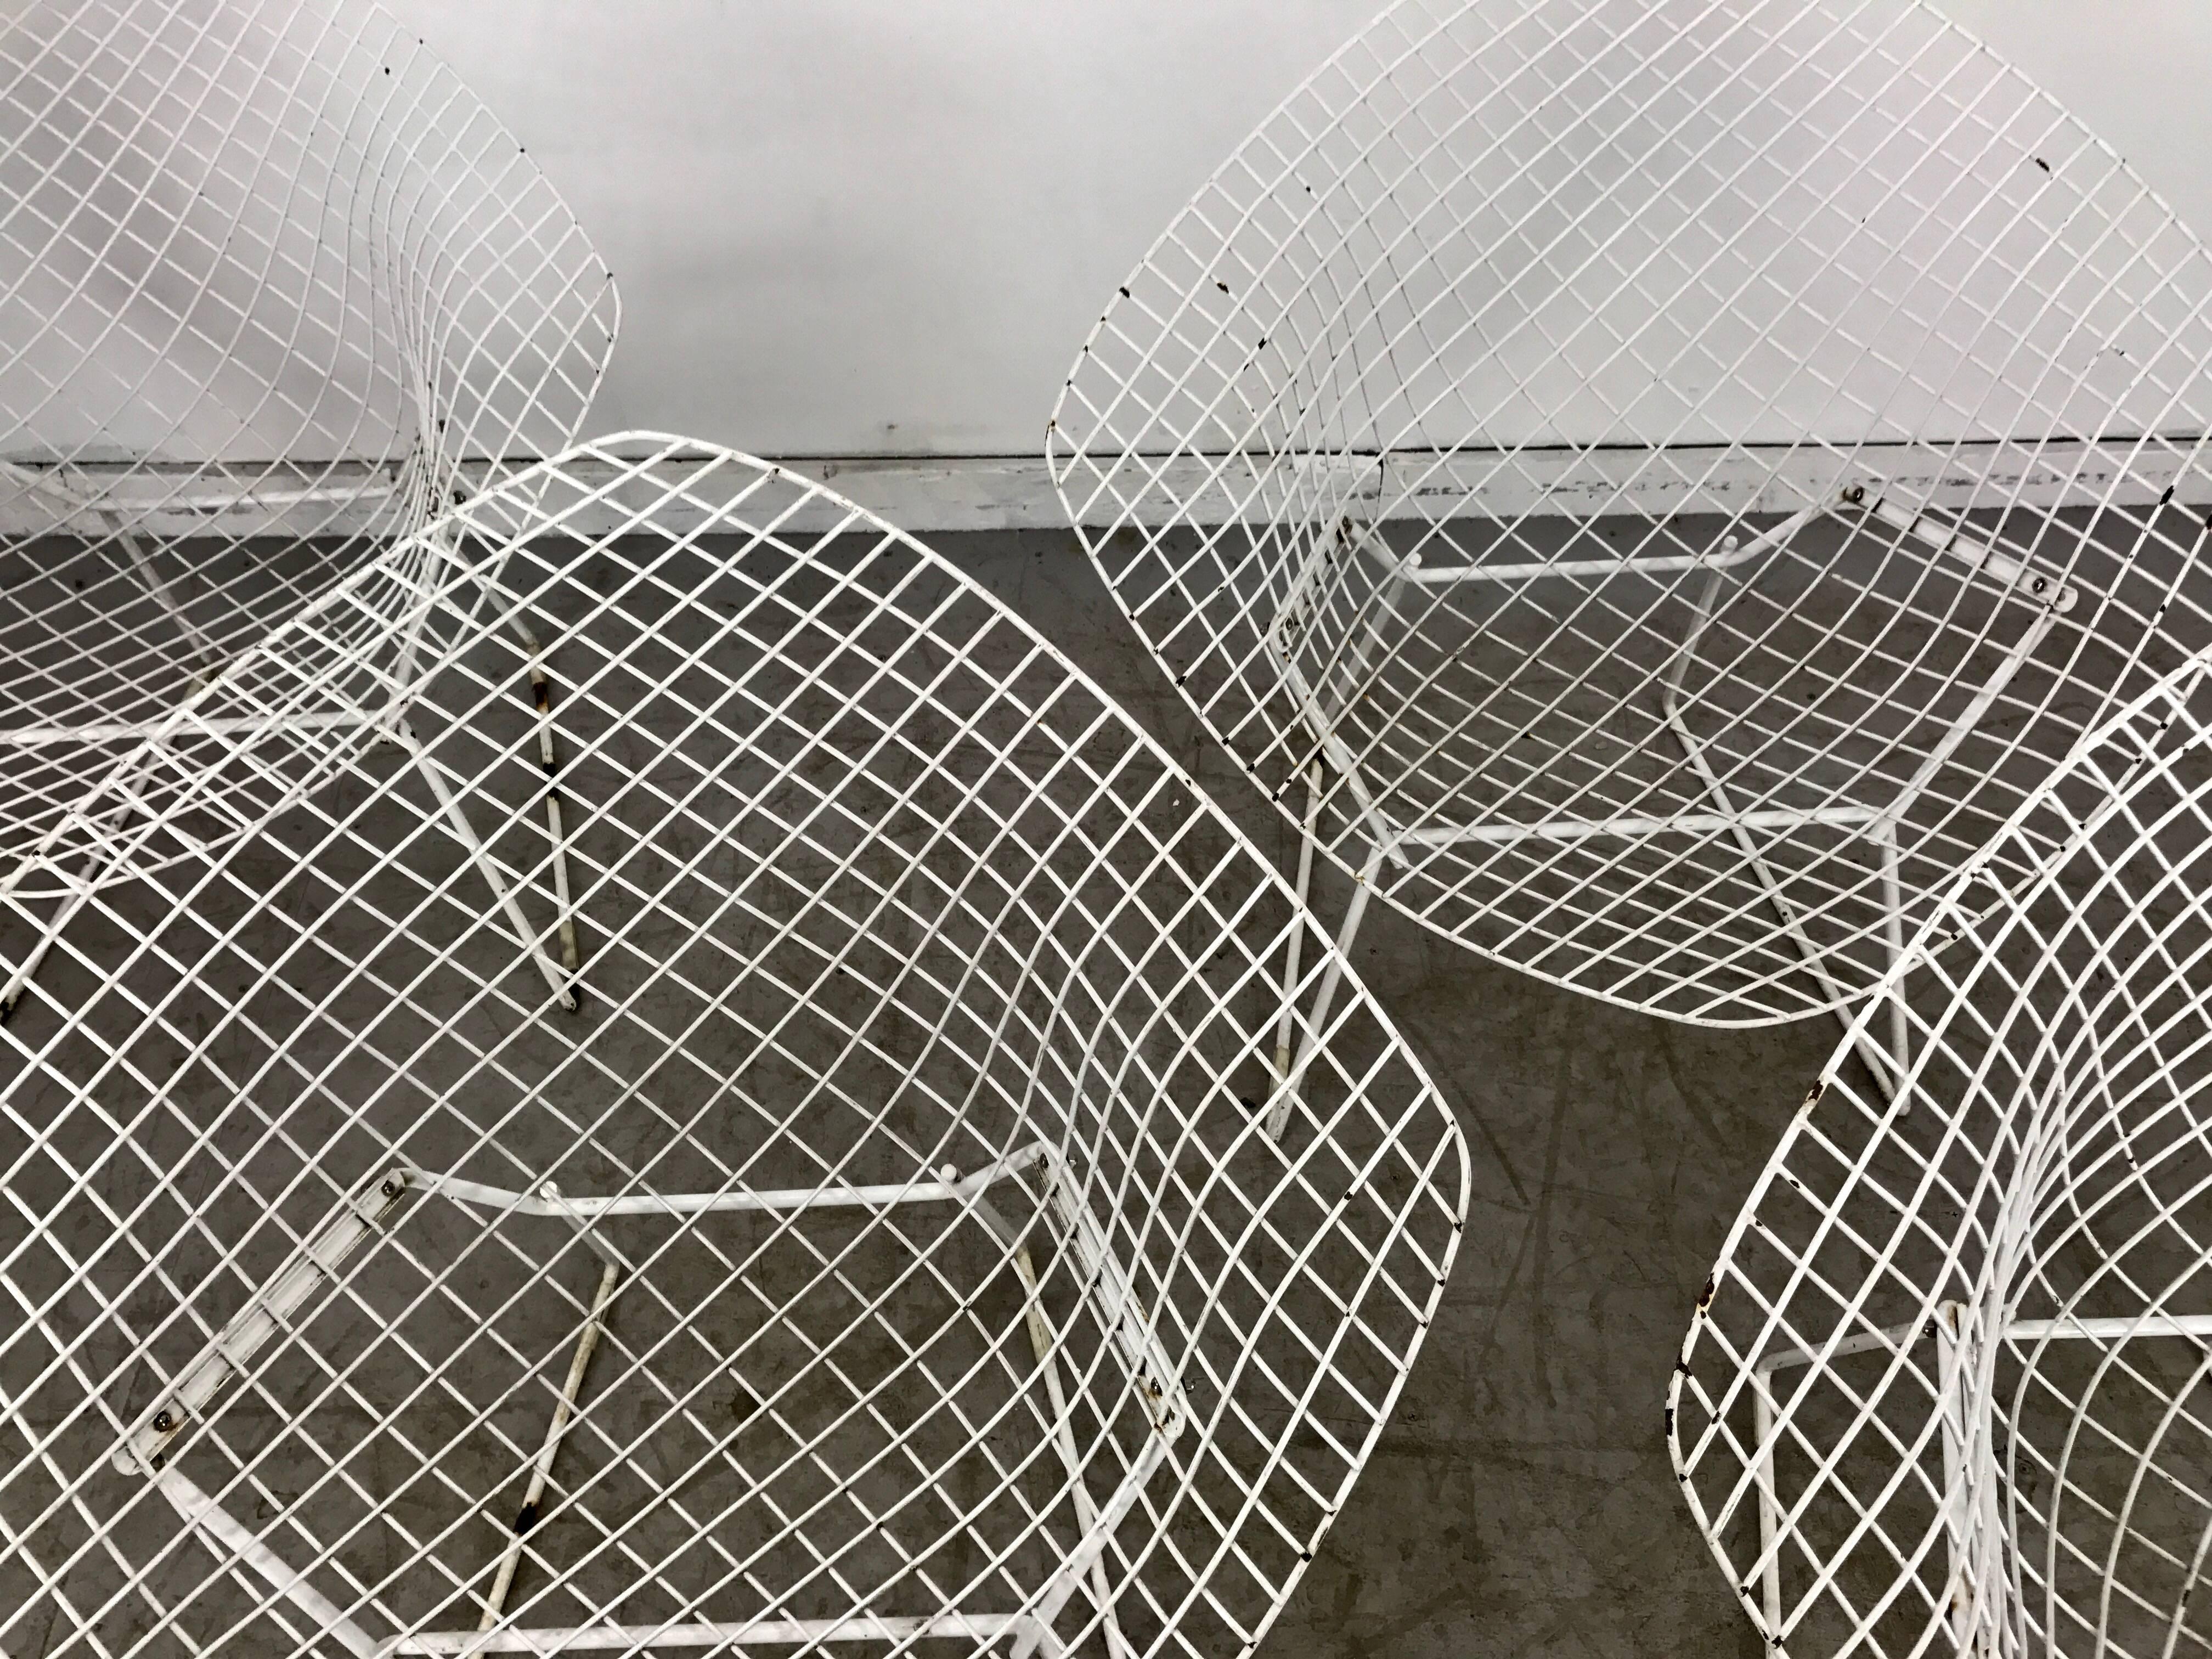 Matching pair of Mid-Century Modern wire 'Diamond' chairs designed by Harry Bertoia manufactured by Knoll. Original finish or patina.